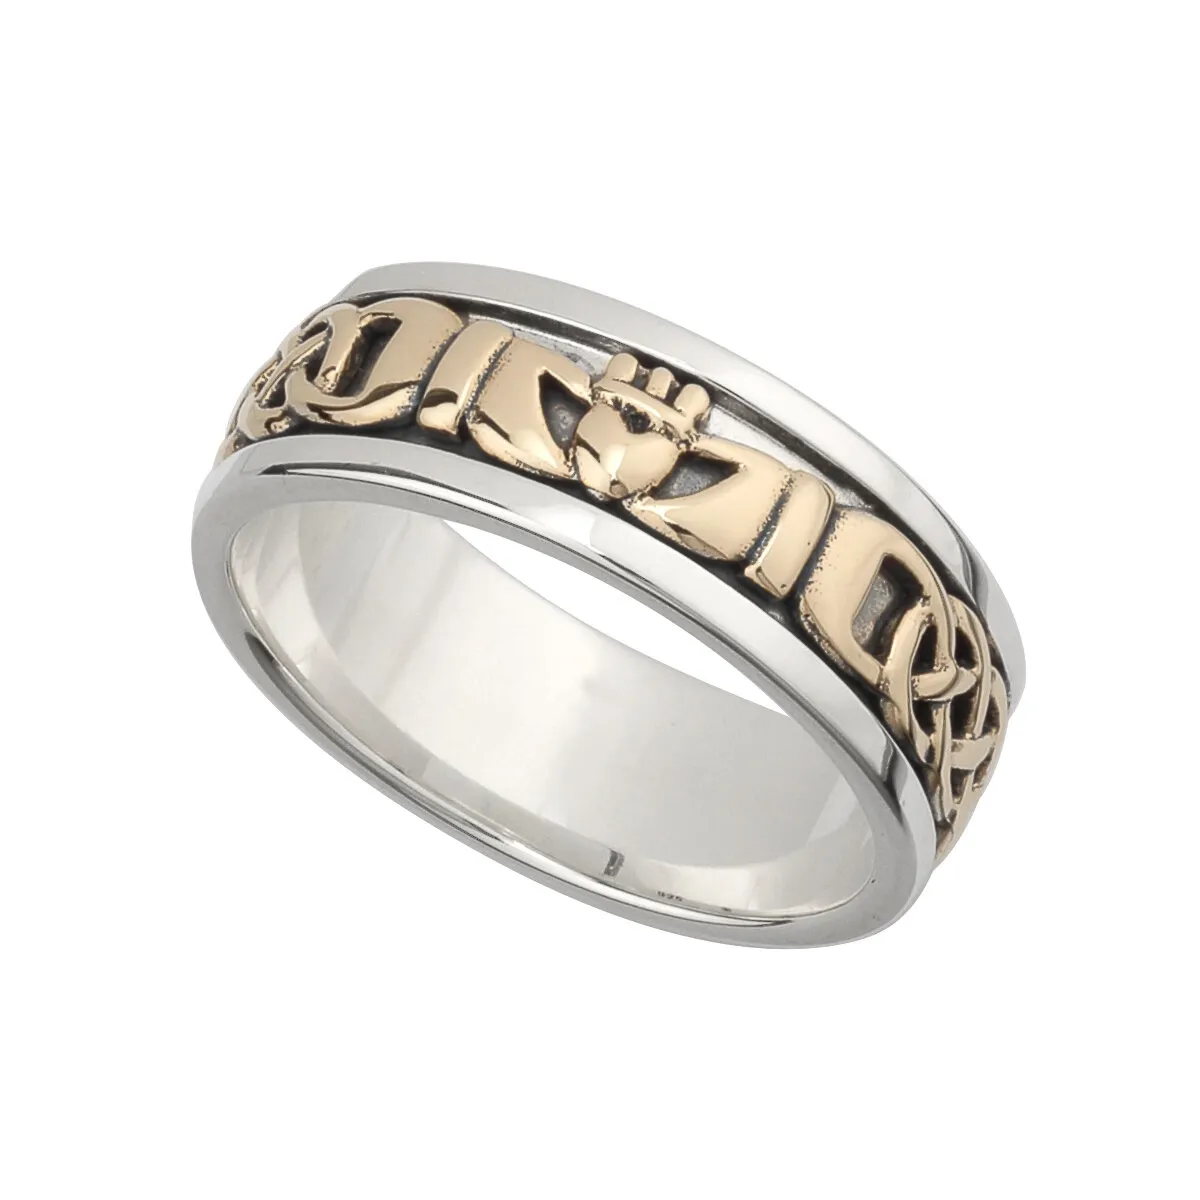 Sterling Silver And Gold Claddagh Band Ring For Him